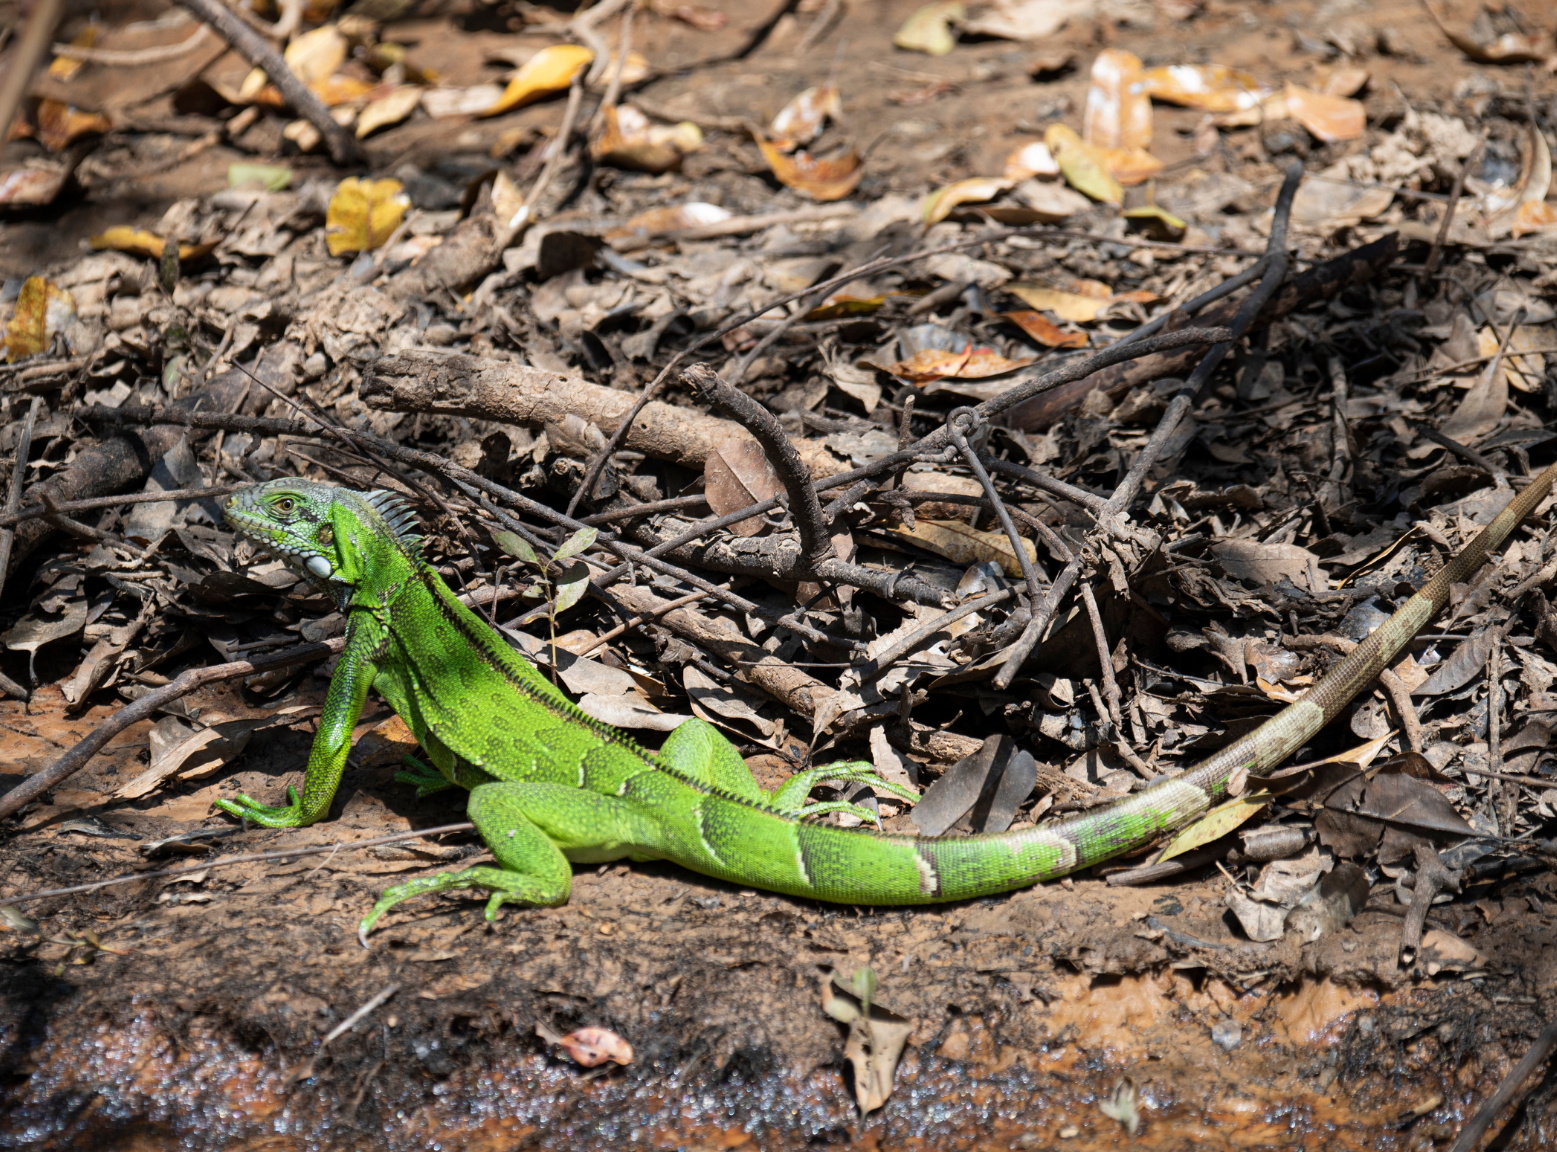 Green iguana loose on a stream embankment in the fall.